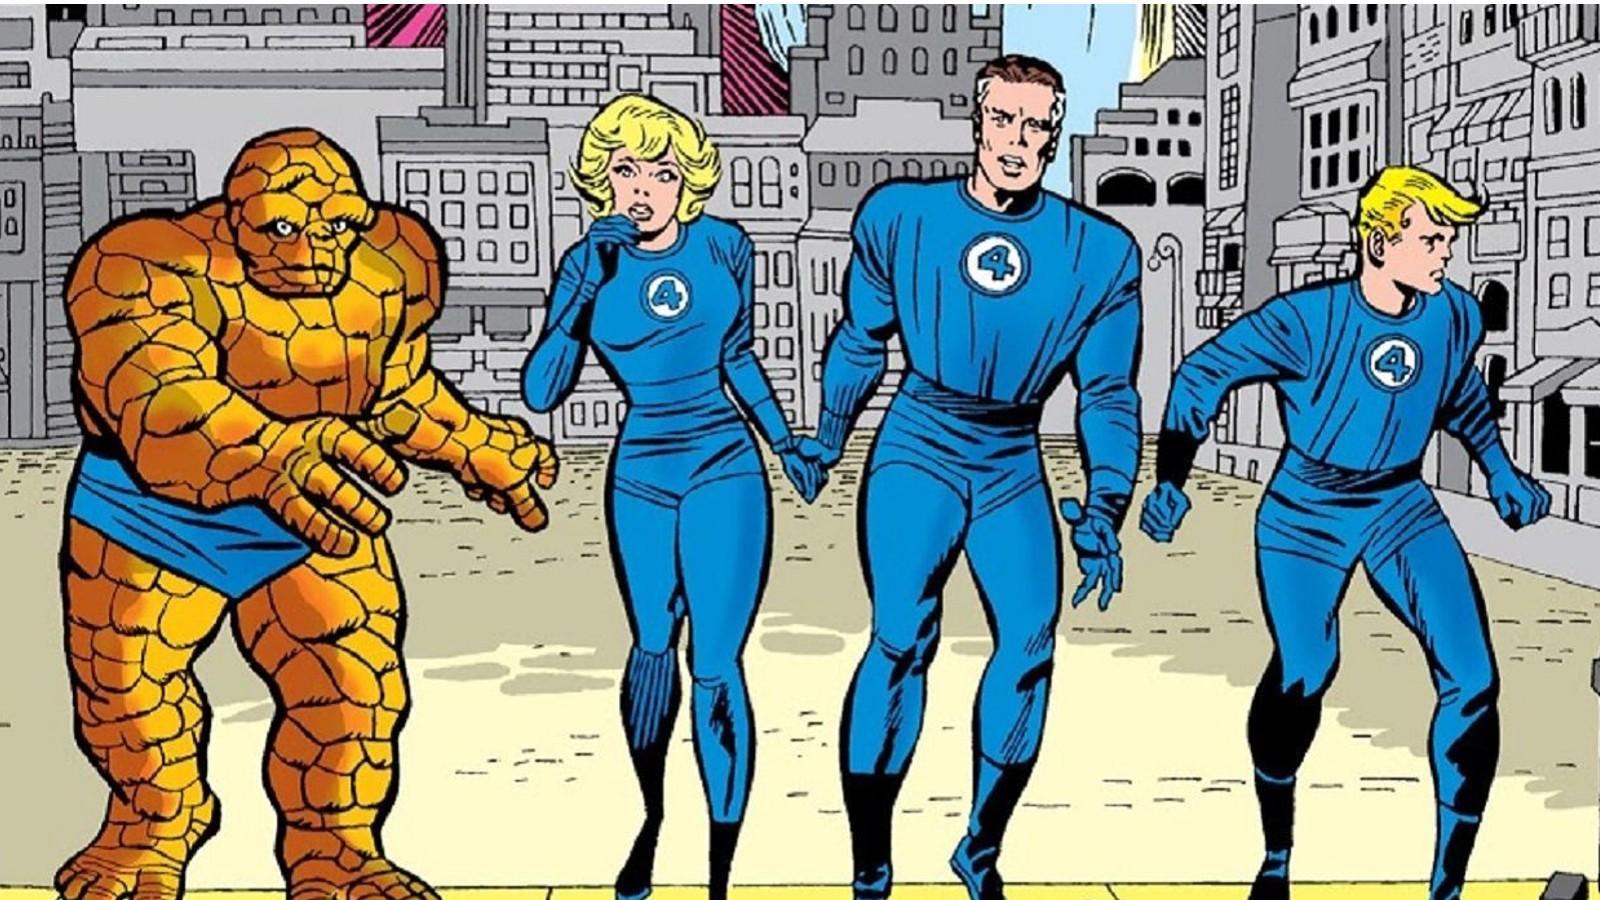 The Fantastic Four in the 1960s.